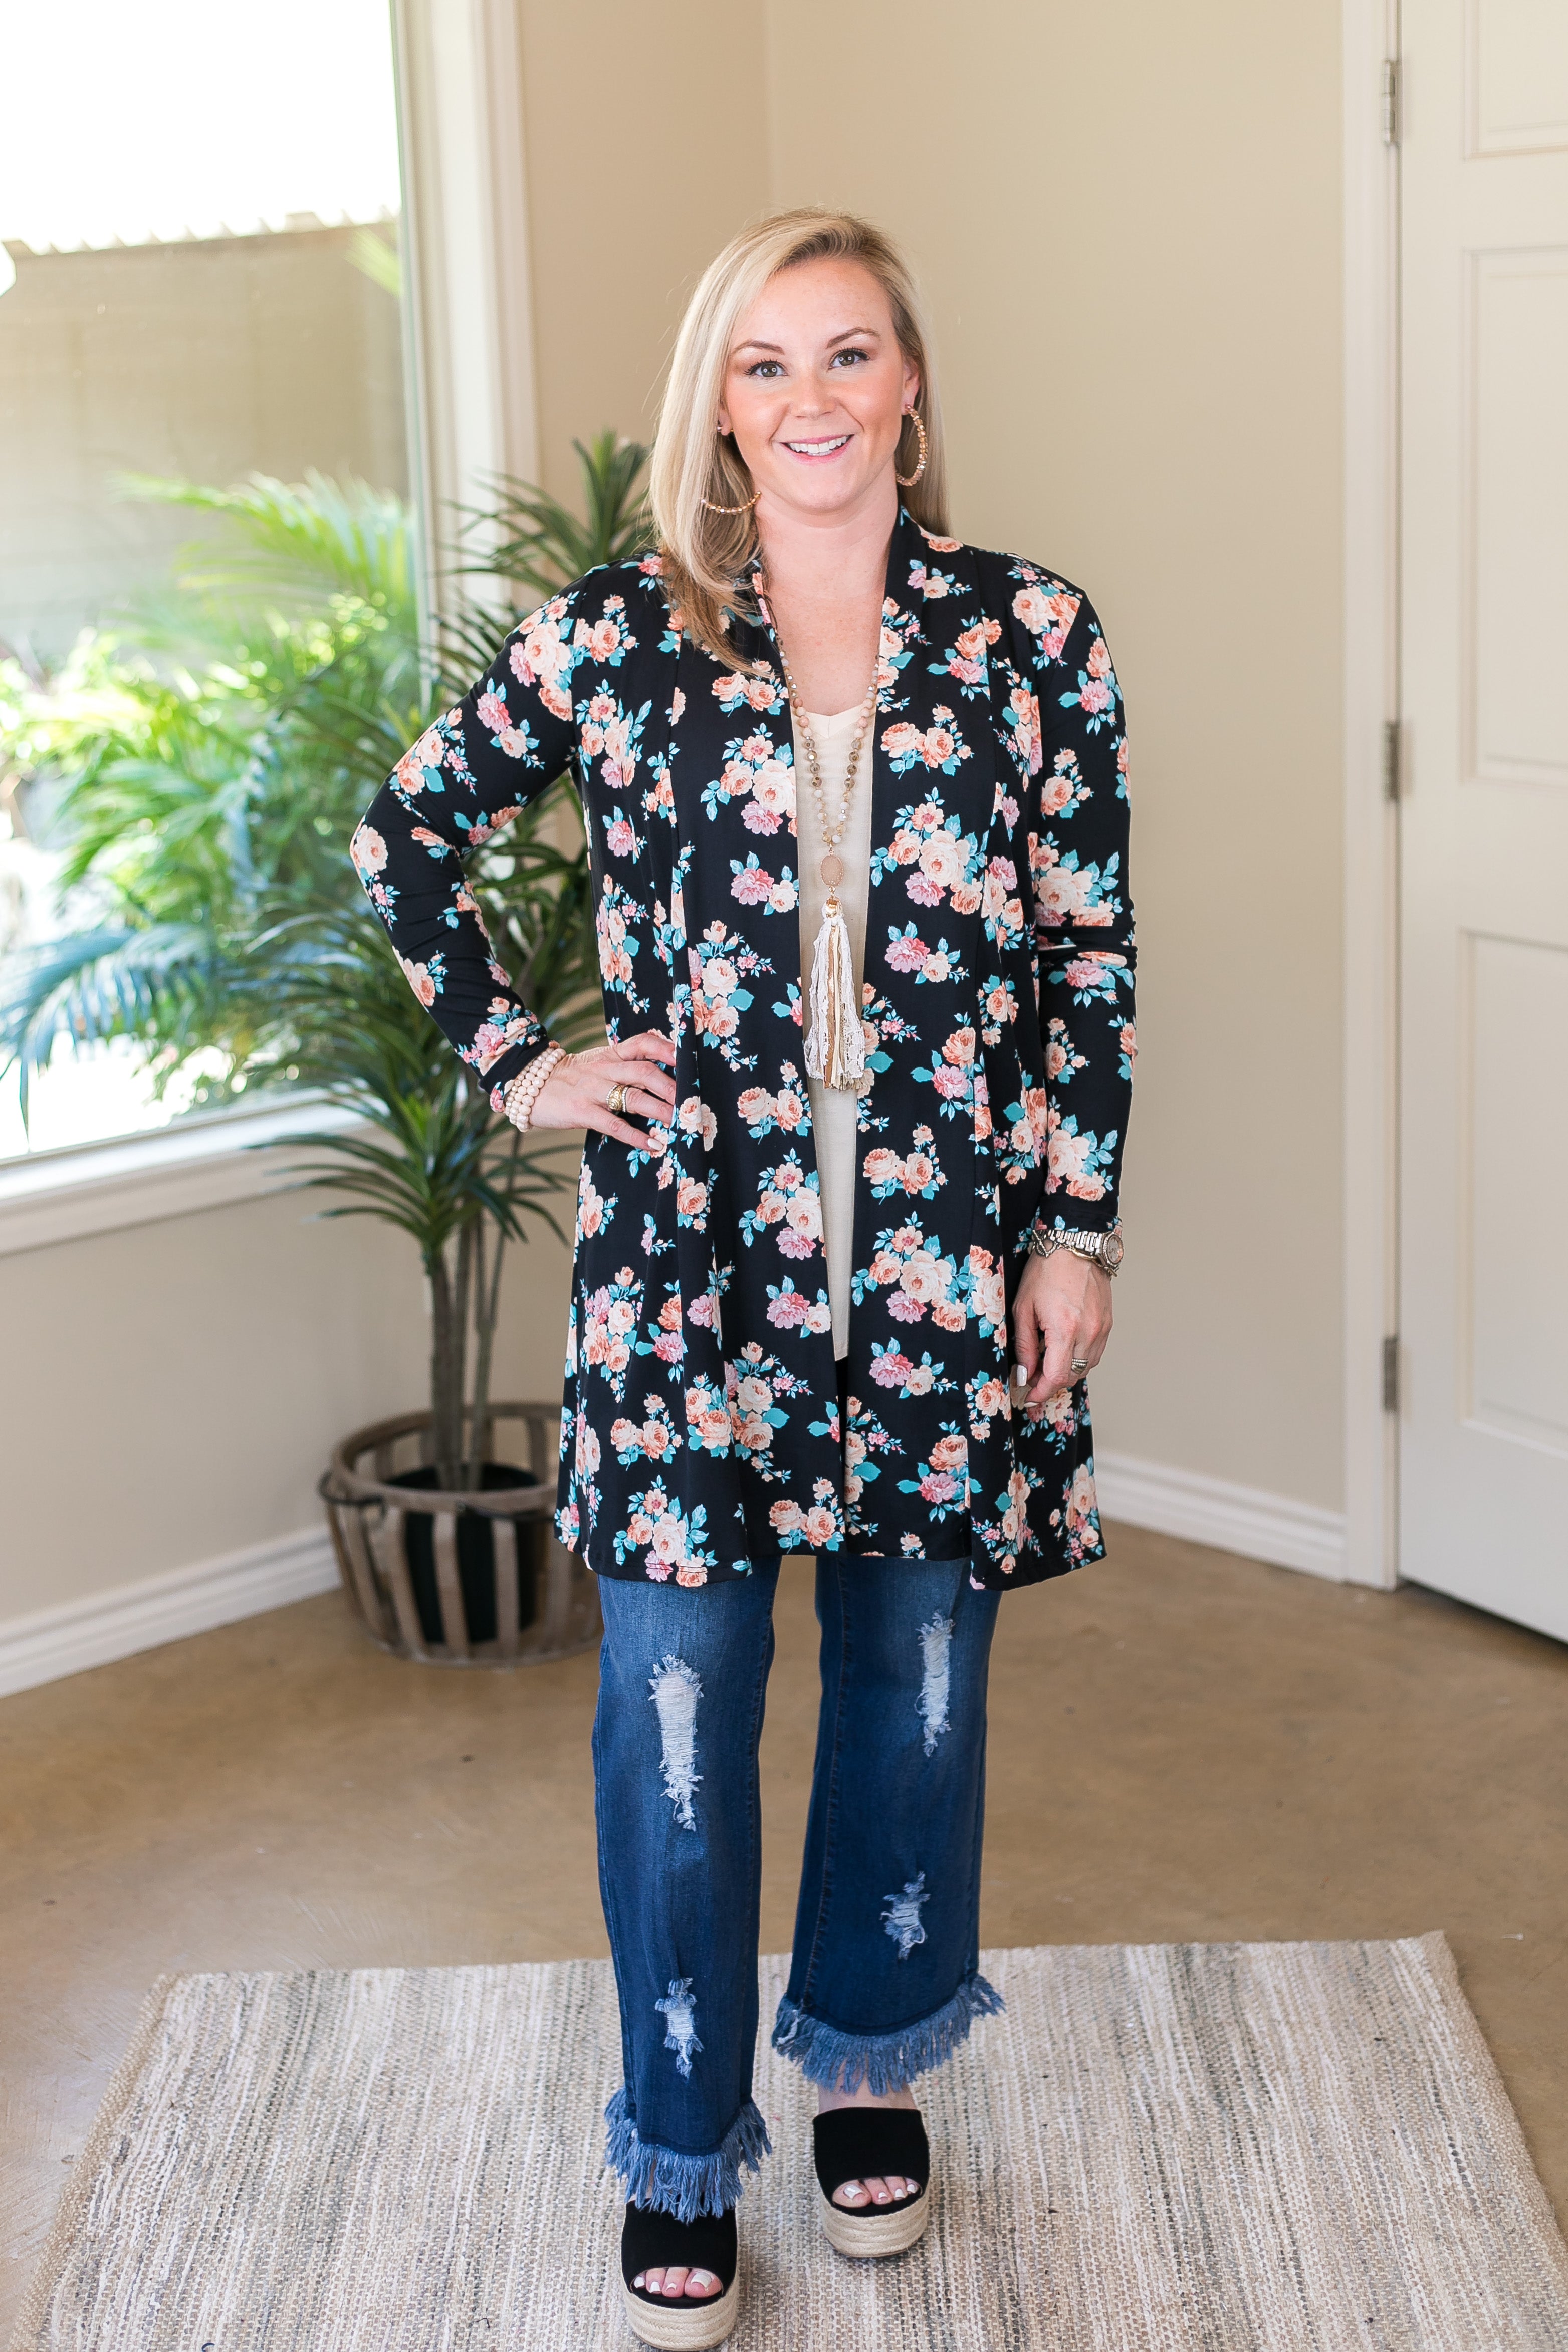 Garden Party Floral Print Super Soft Cardigan in Black - Giddy Up Glamour Boutique